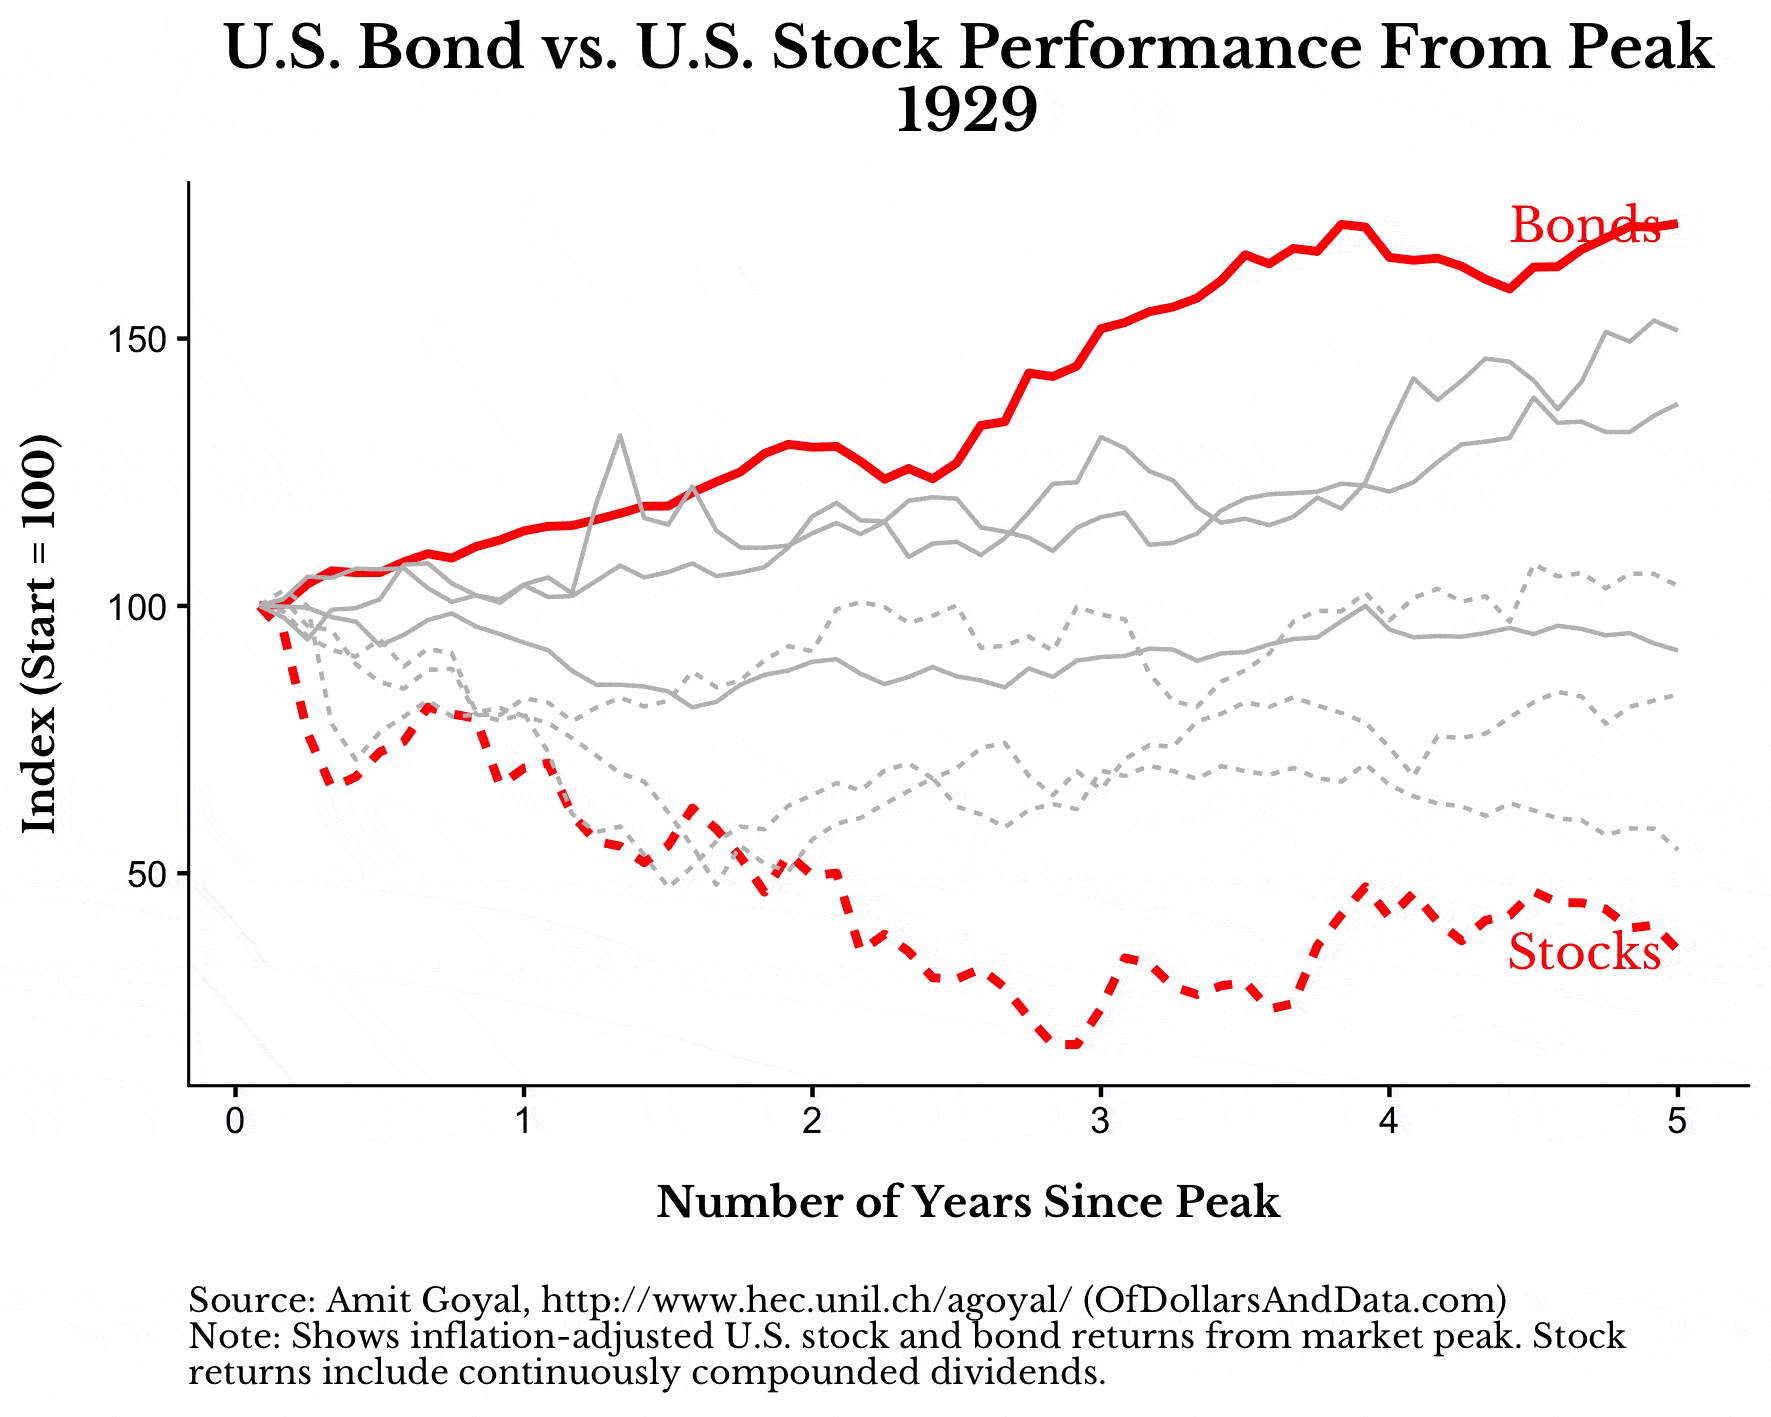 GIF of U.S. stock and bond performance for the 5 years after a peak for 1929, 1973, 1987, and 2007